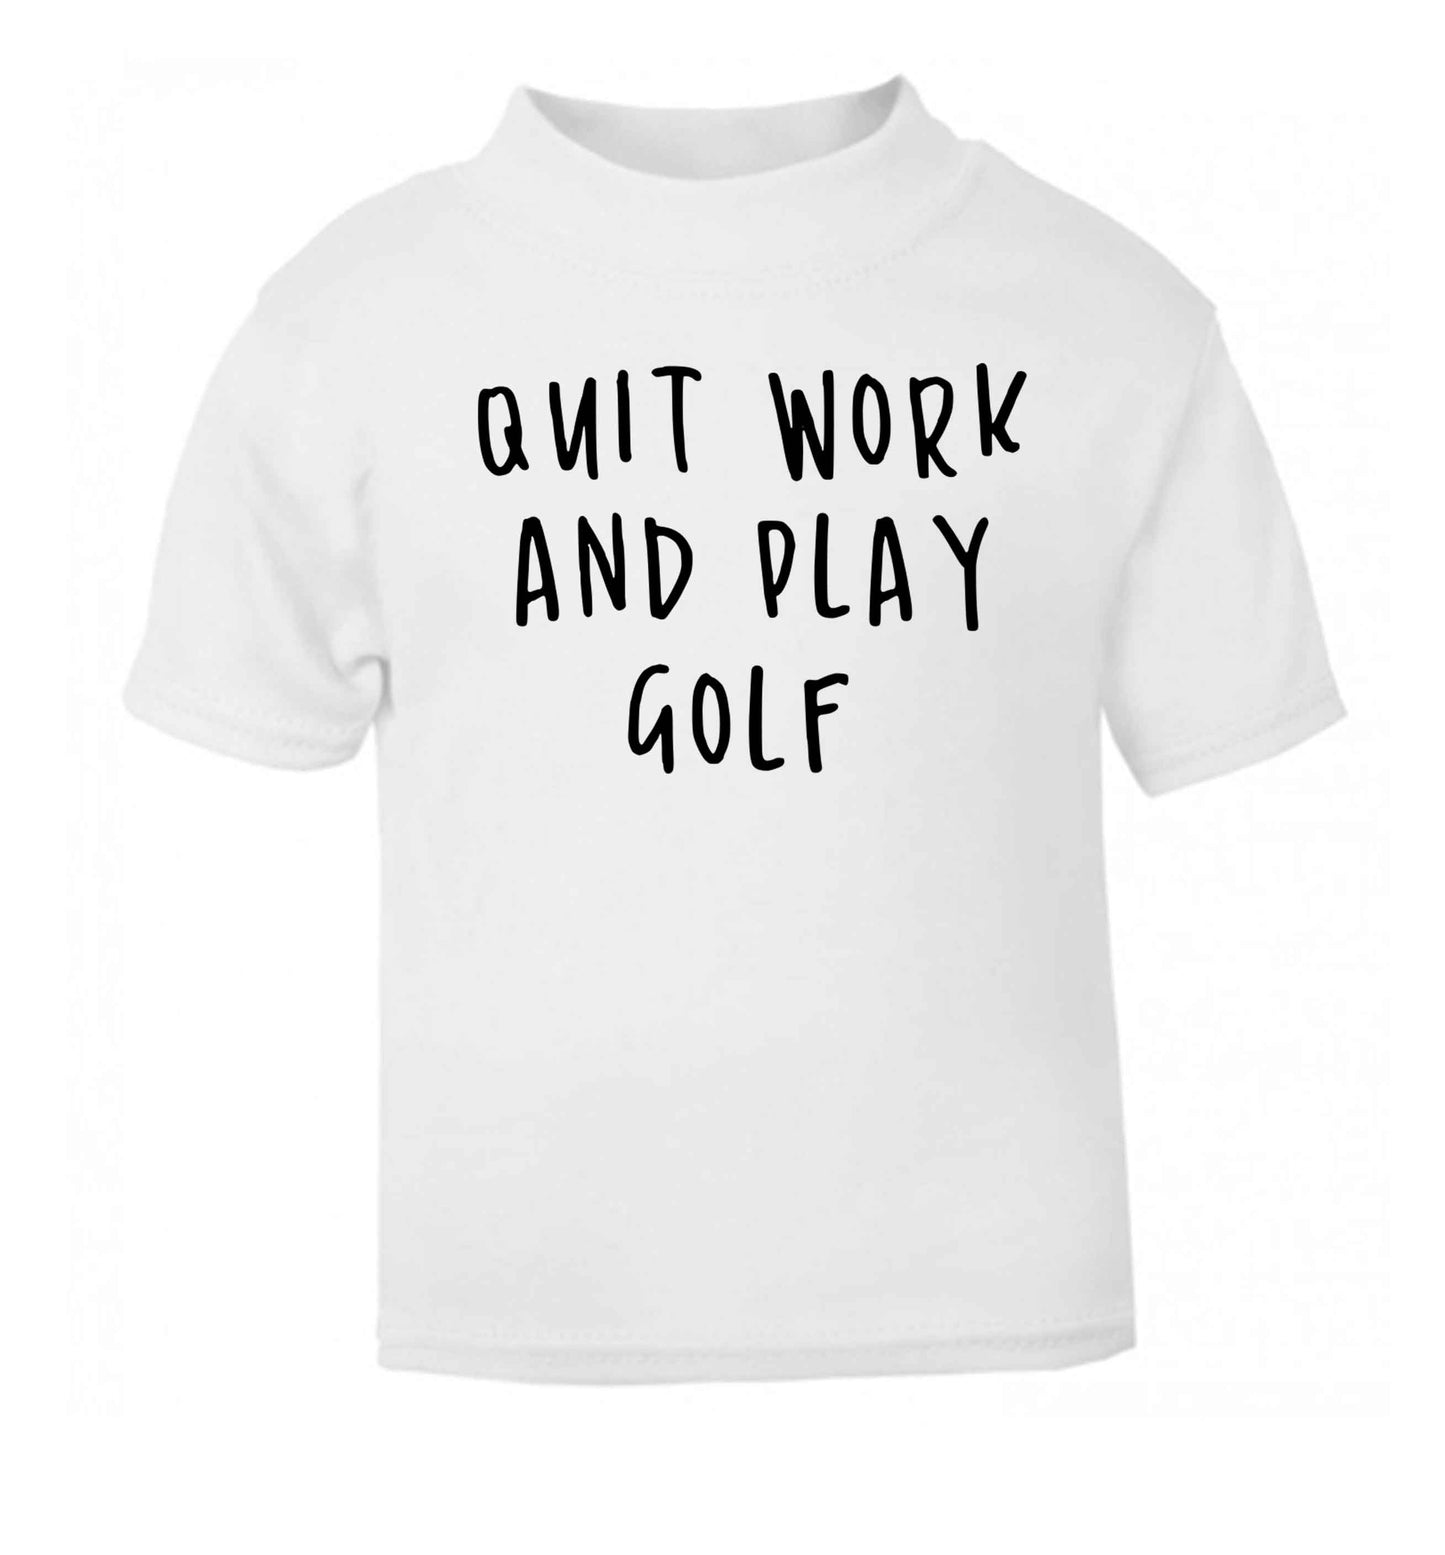 Quit work and play golf white Baby Toddler Tshirt 2 Years